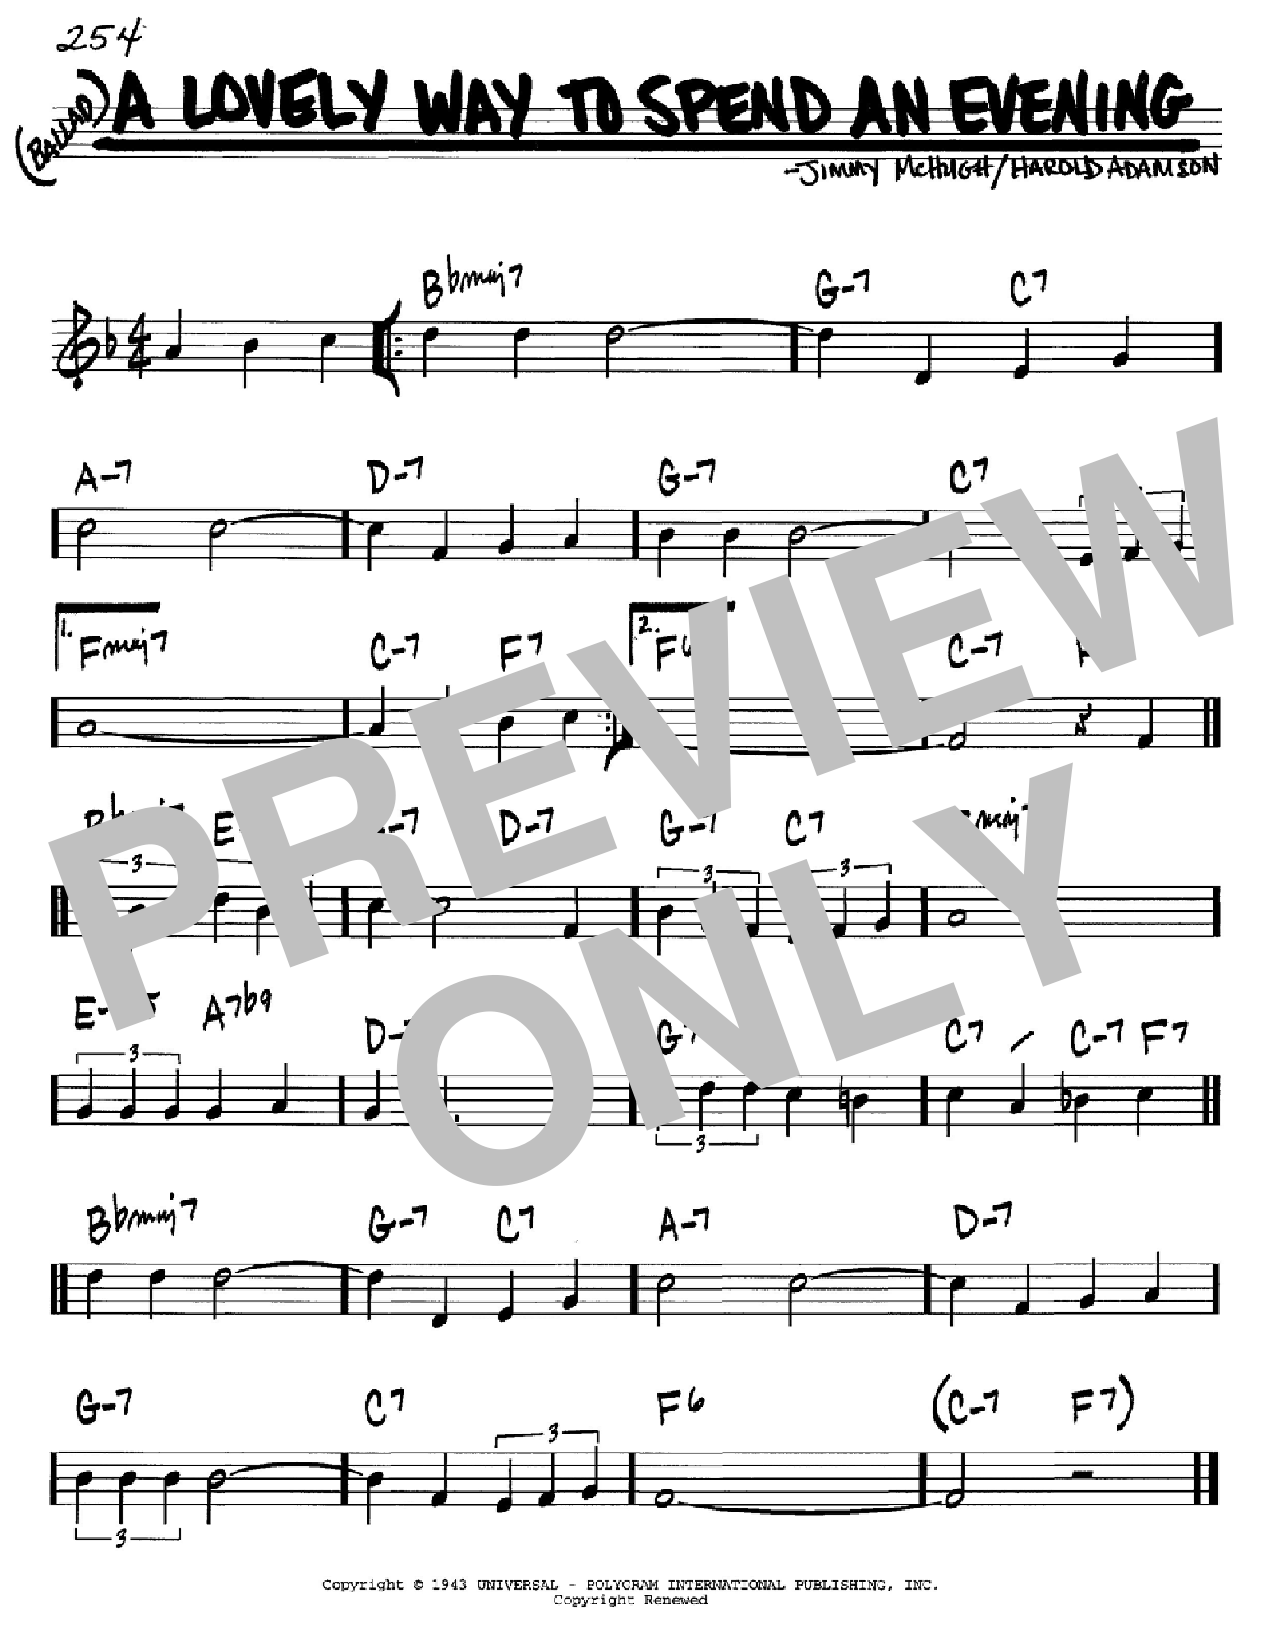 Download Frank Sinatra A Lovely Way To Spend An Evening Sheet Music